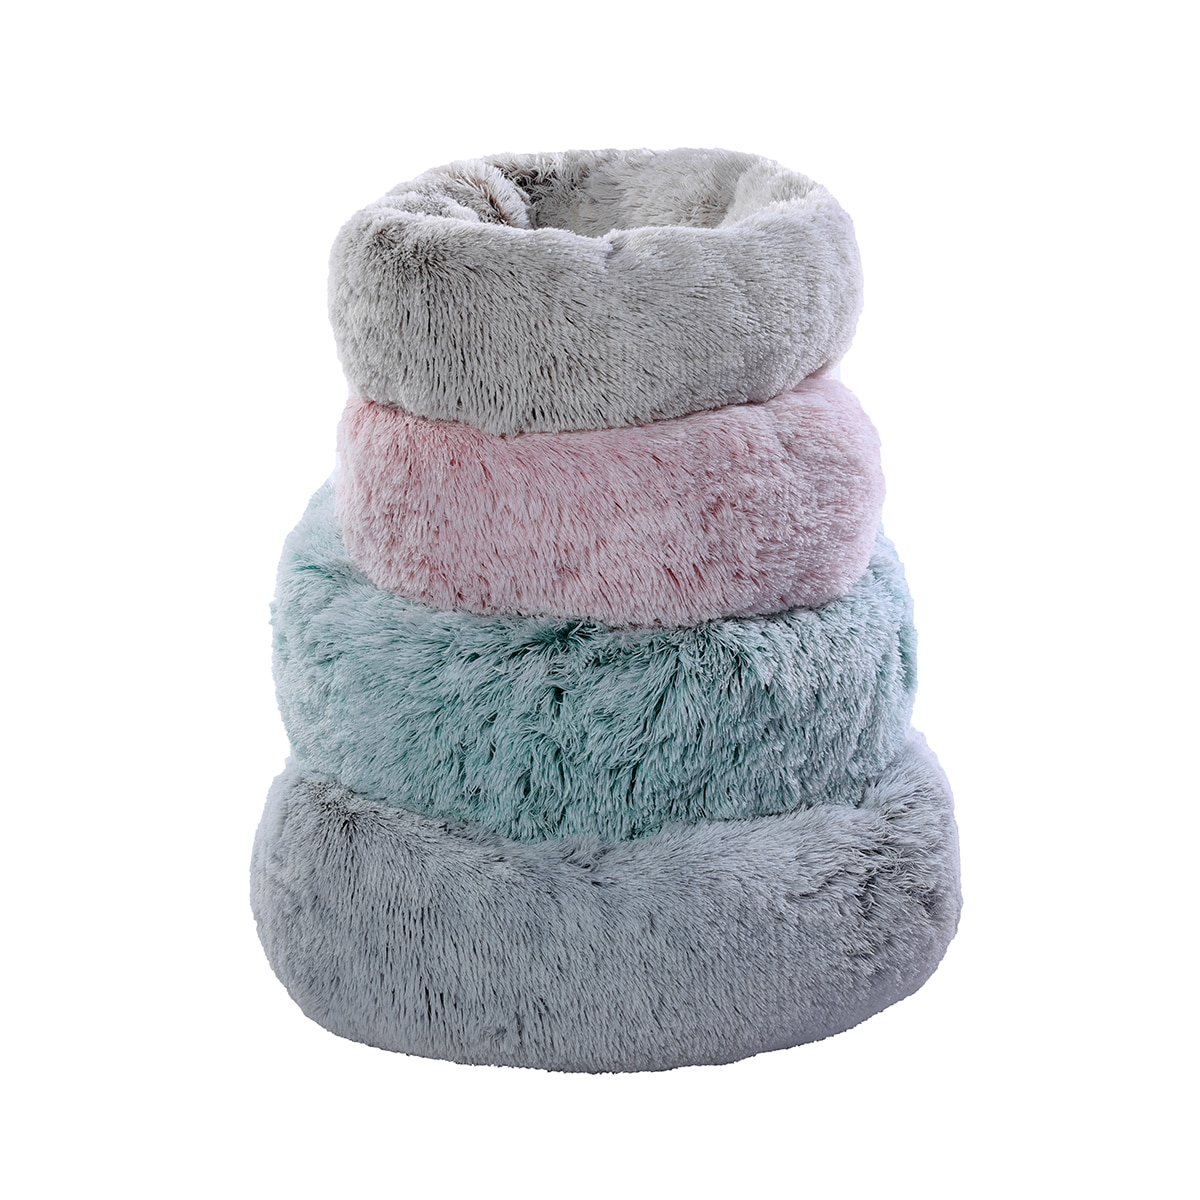 Thick cutton round pet dog bed super soft long plush pets bed cat mat Cats Nest Winter Warm Sleeping dogs Kennel sofa